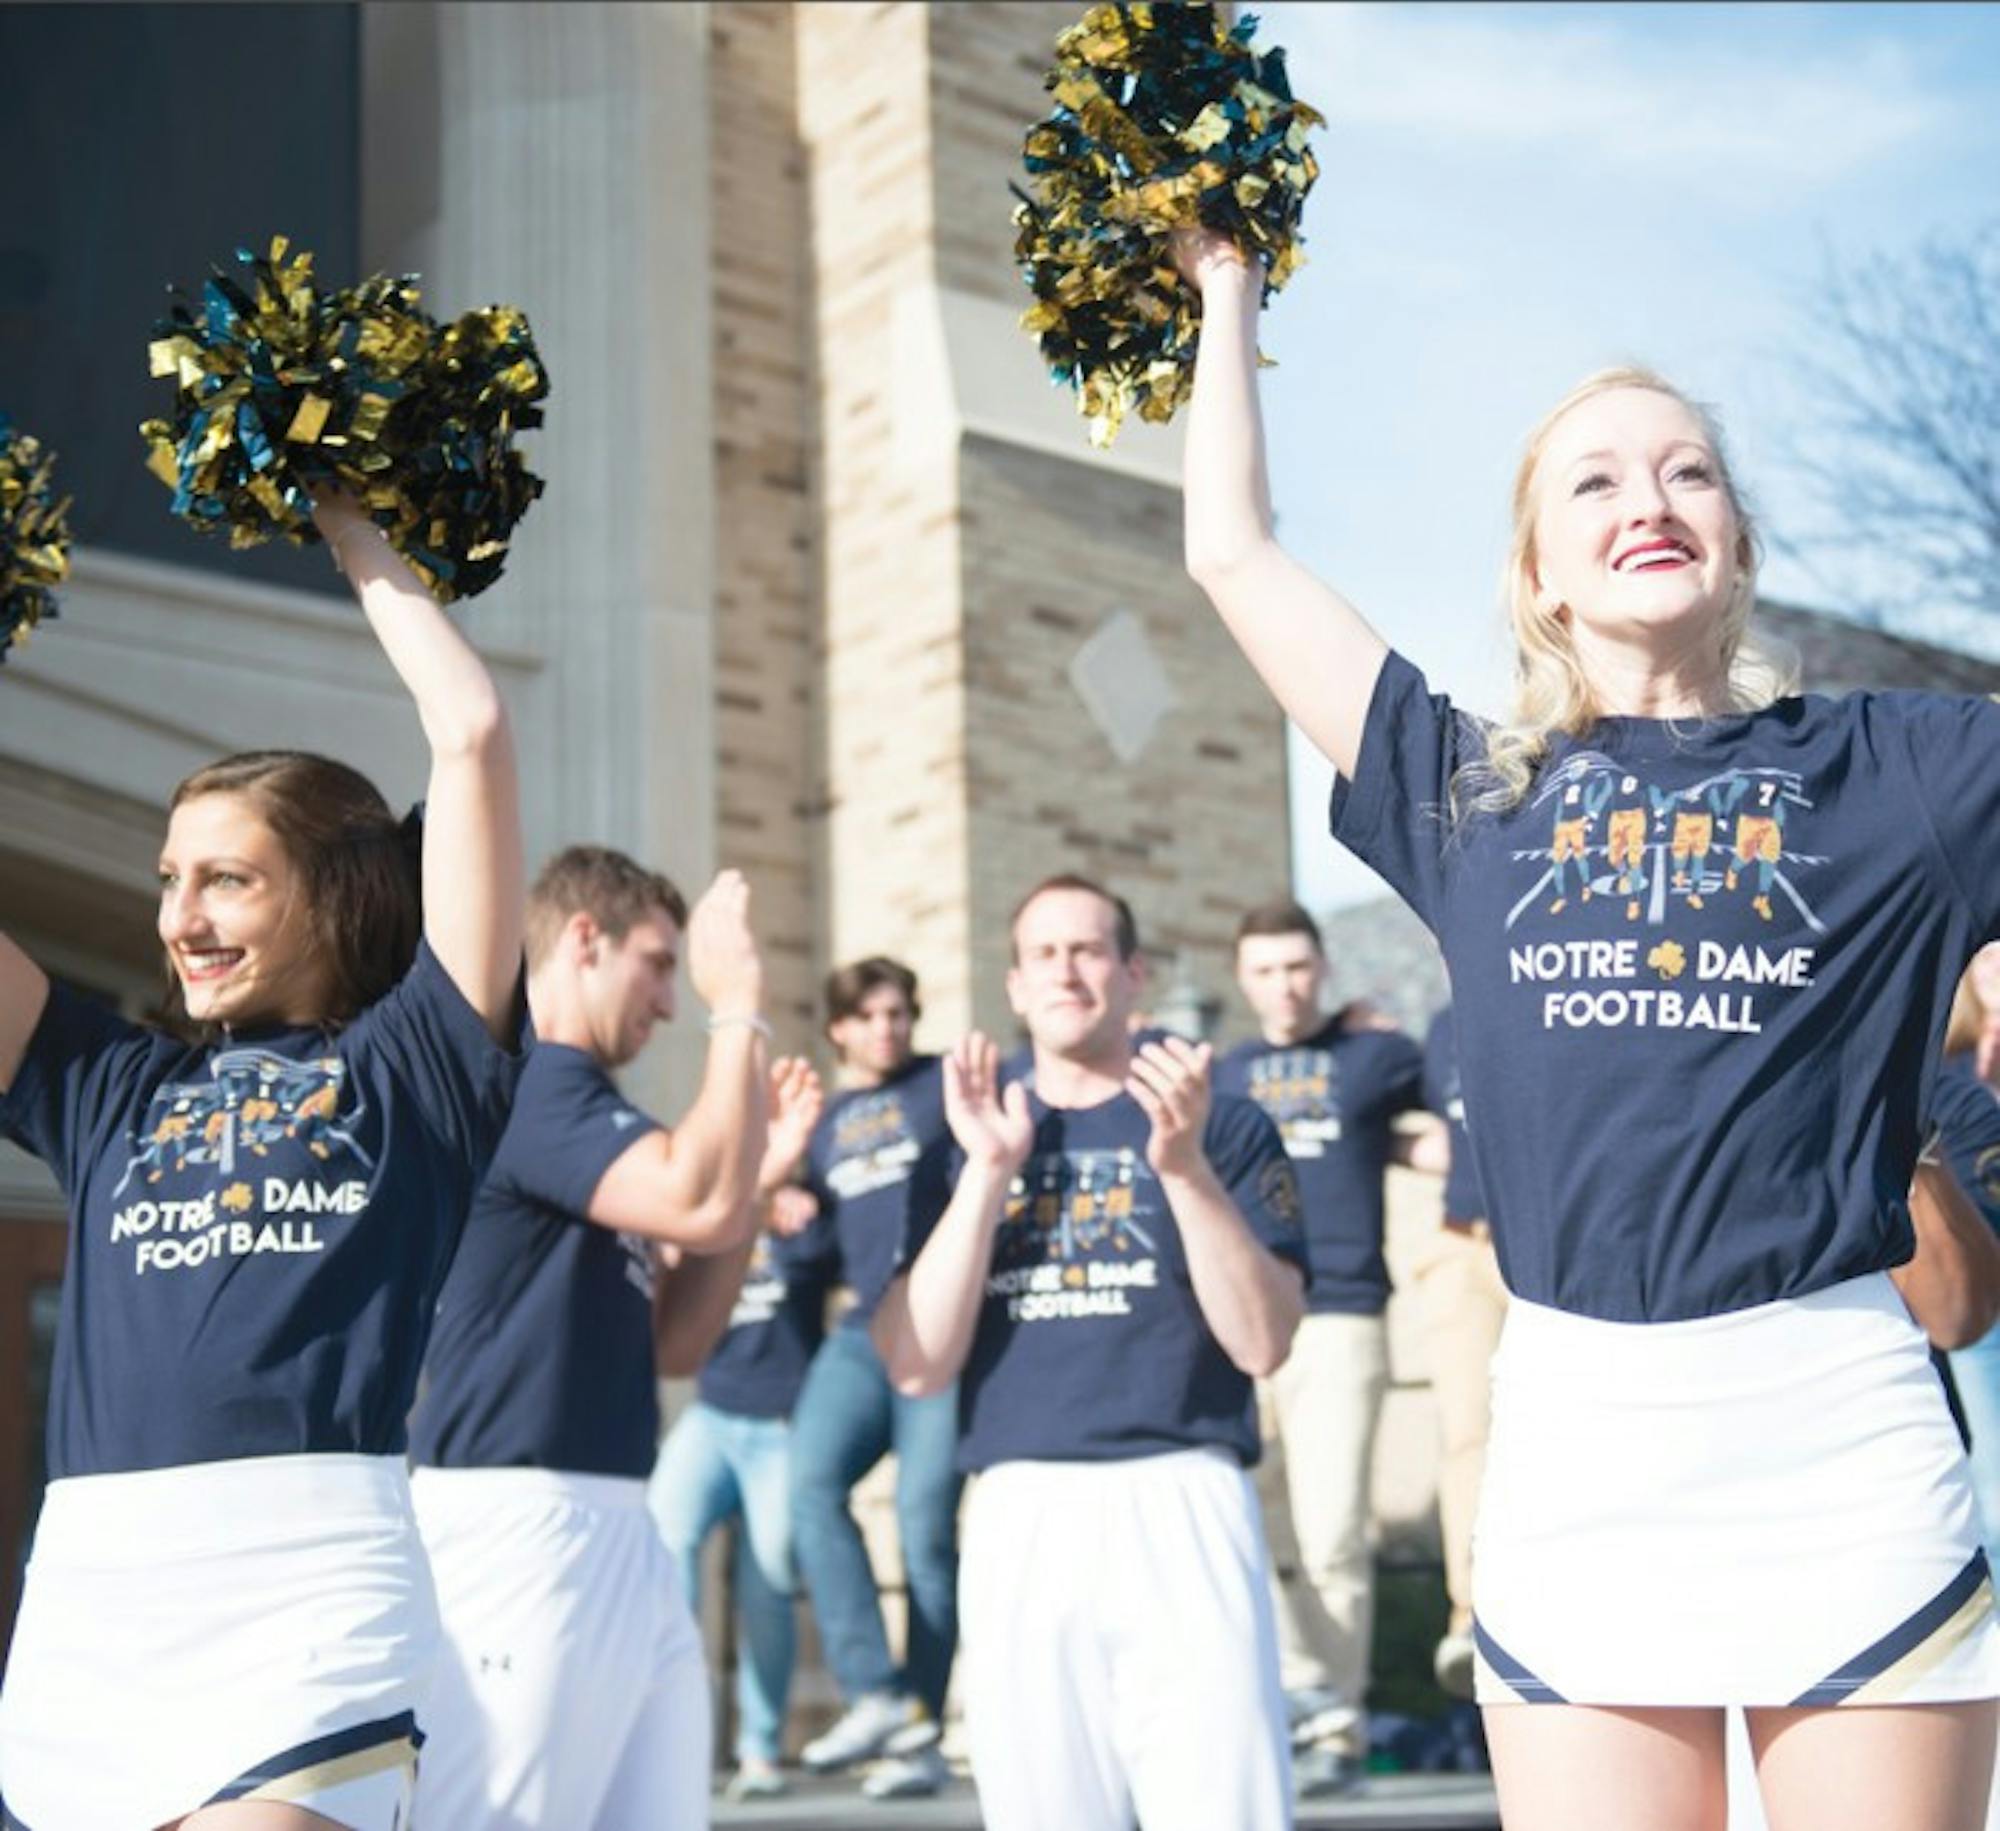 Members of the Notre Dame cheerleading team don the 2017 edition of the shirt as they cheer at the unveiling ceremony at the Hammes Bookstore on Friday.